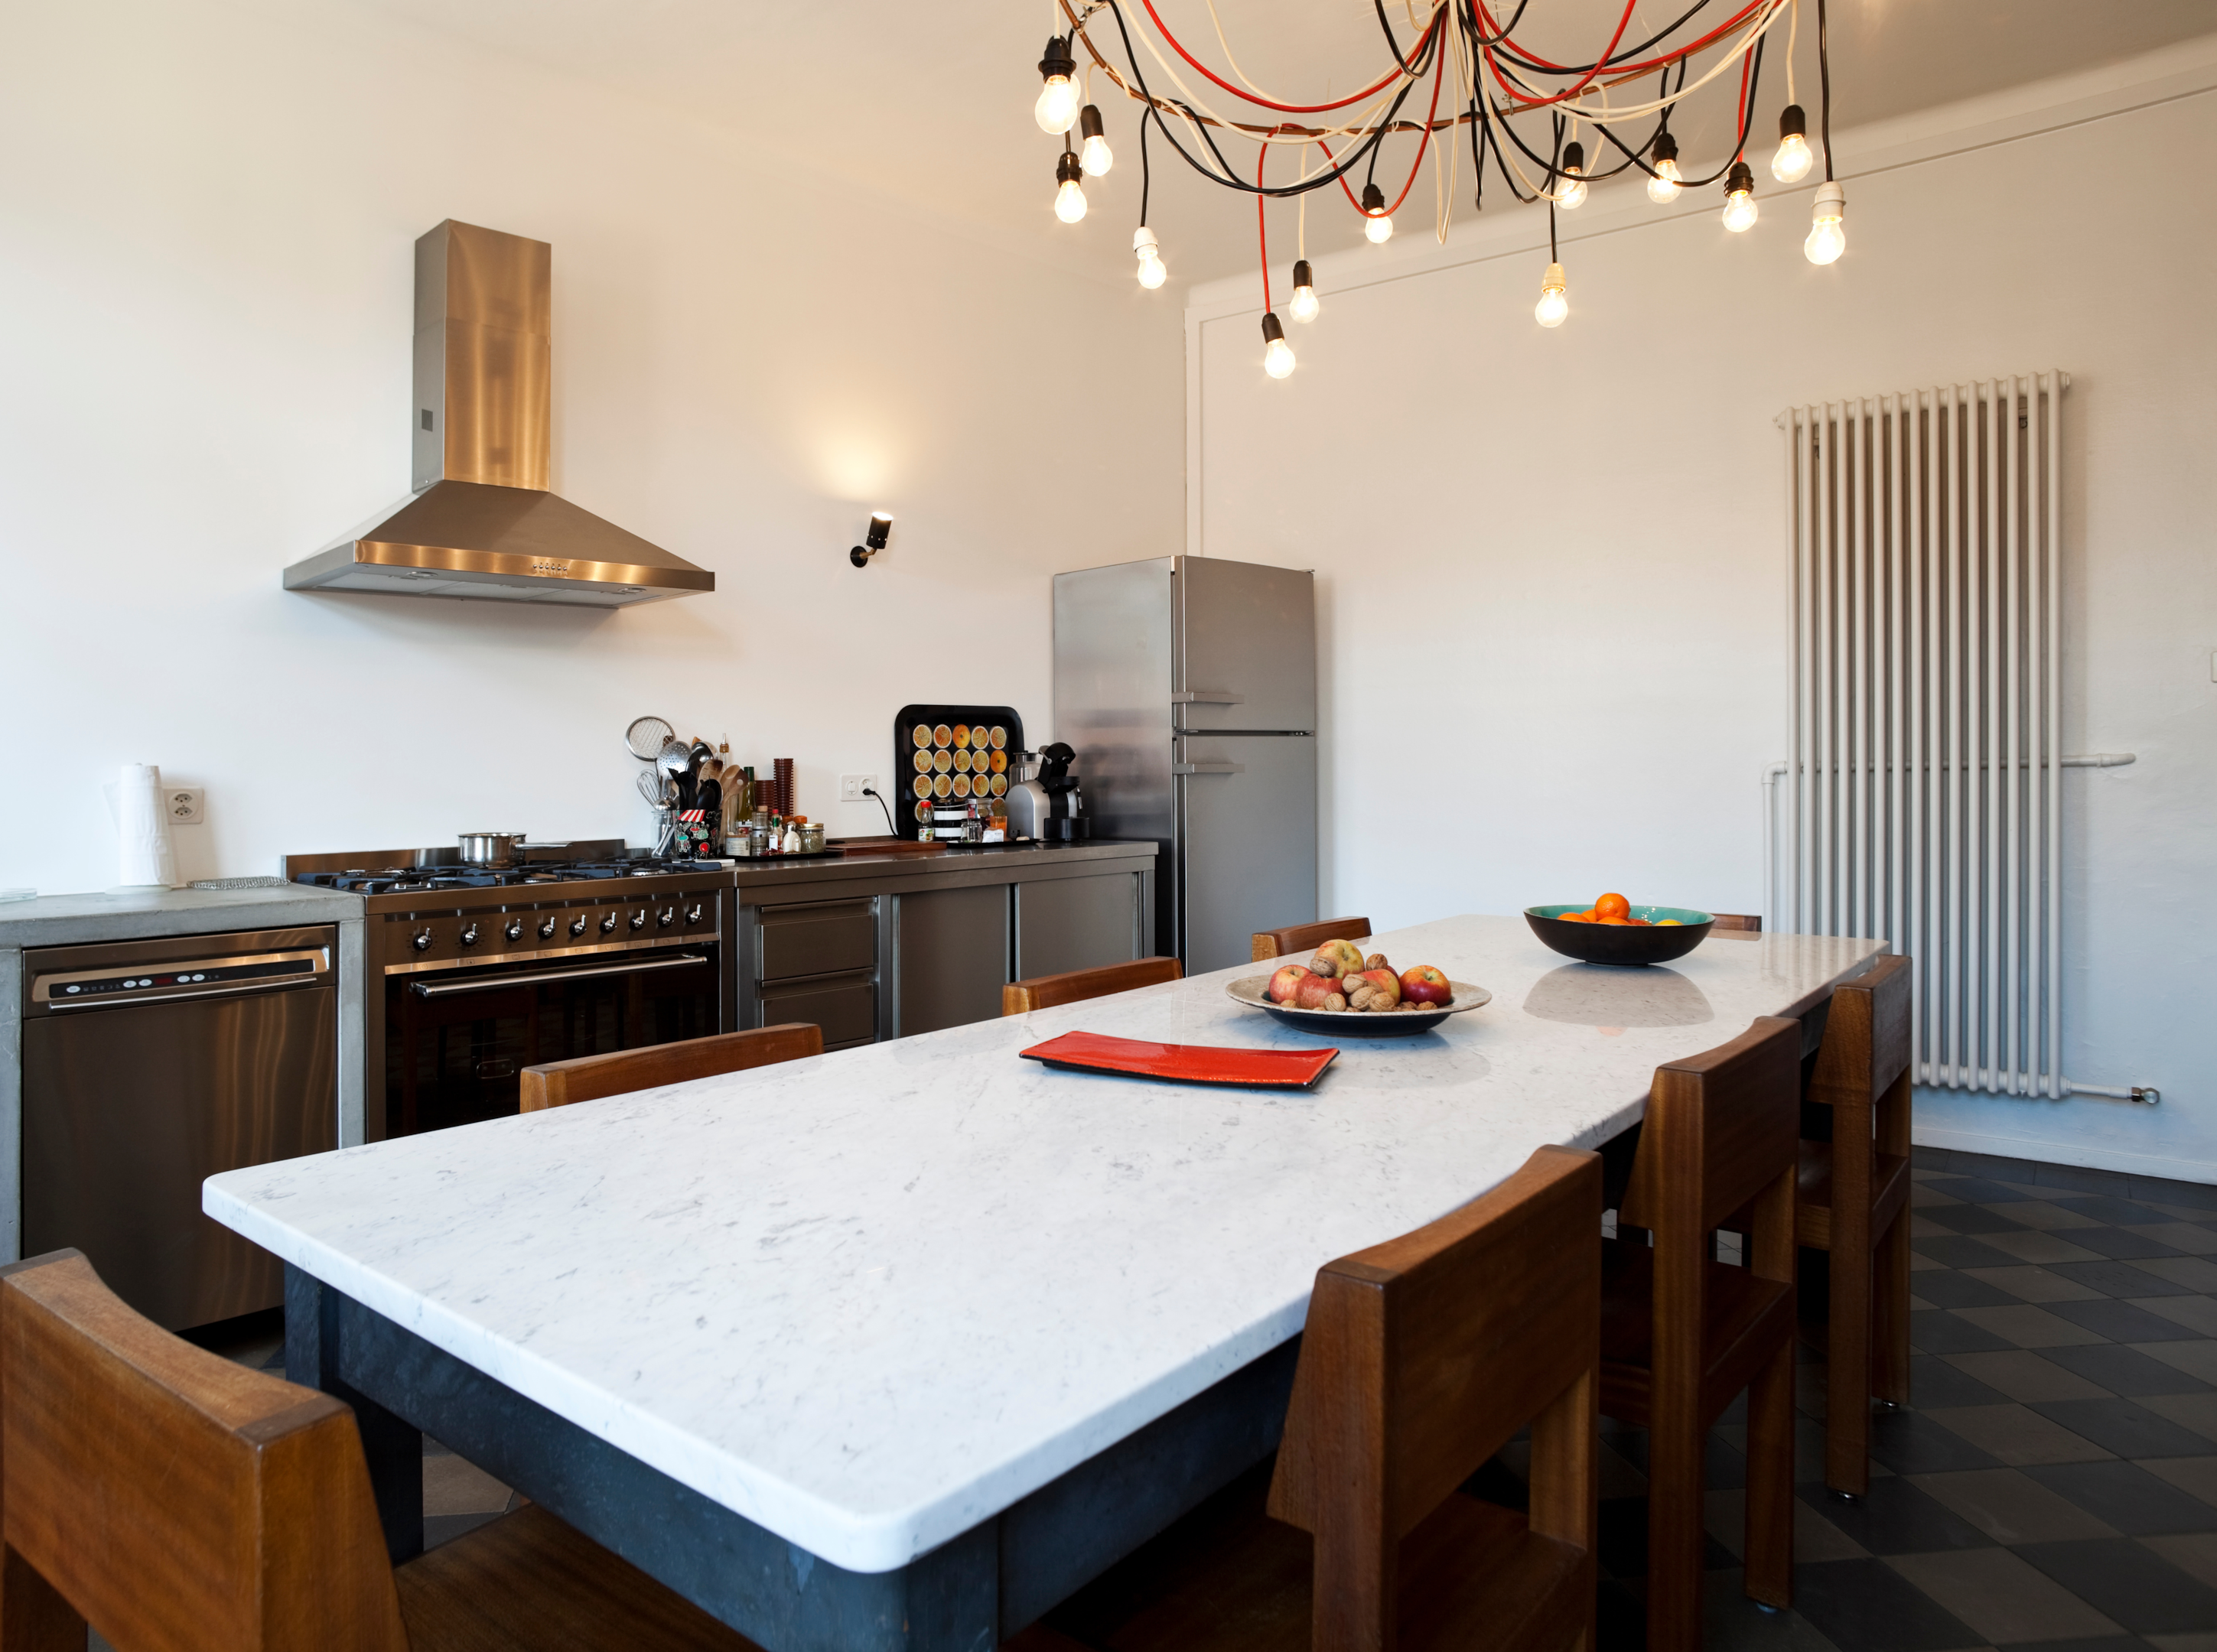 tall kitchen radiators that perfectly complement a new kitchen